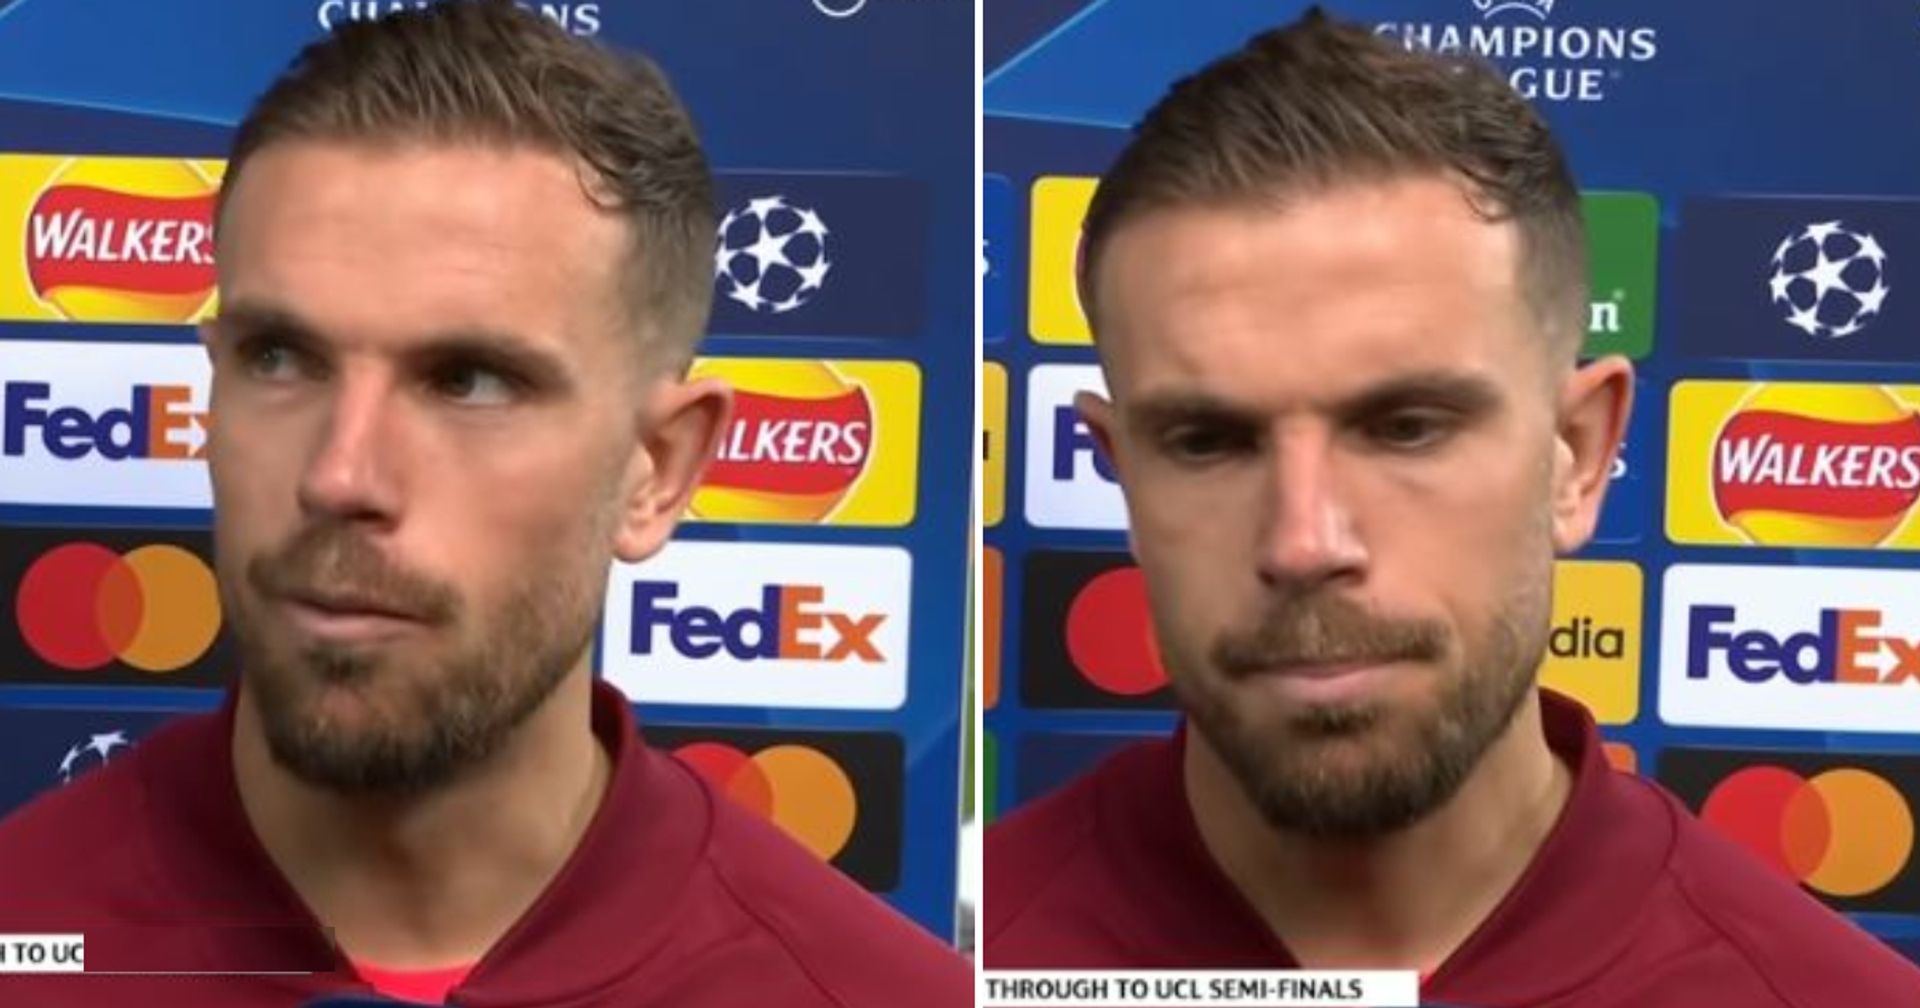 'They have knocked out good sides': Henderson gives stern warning on Villarreal